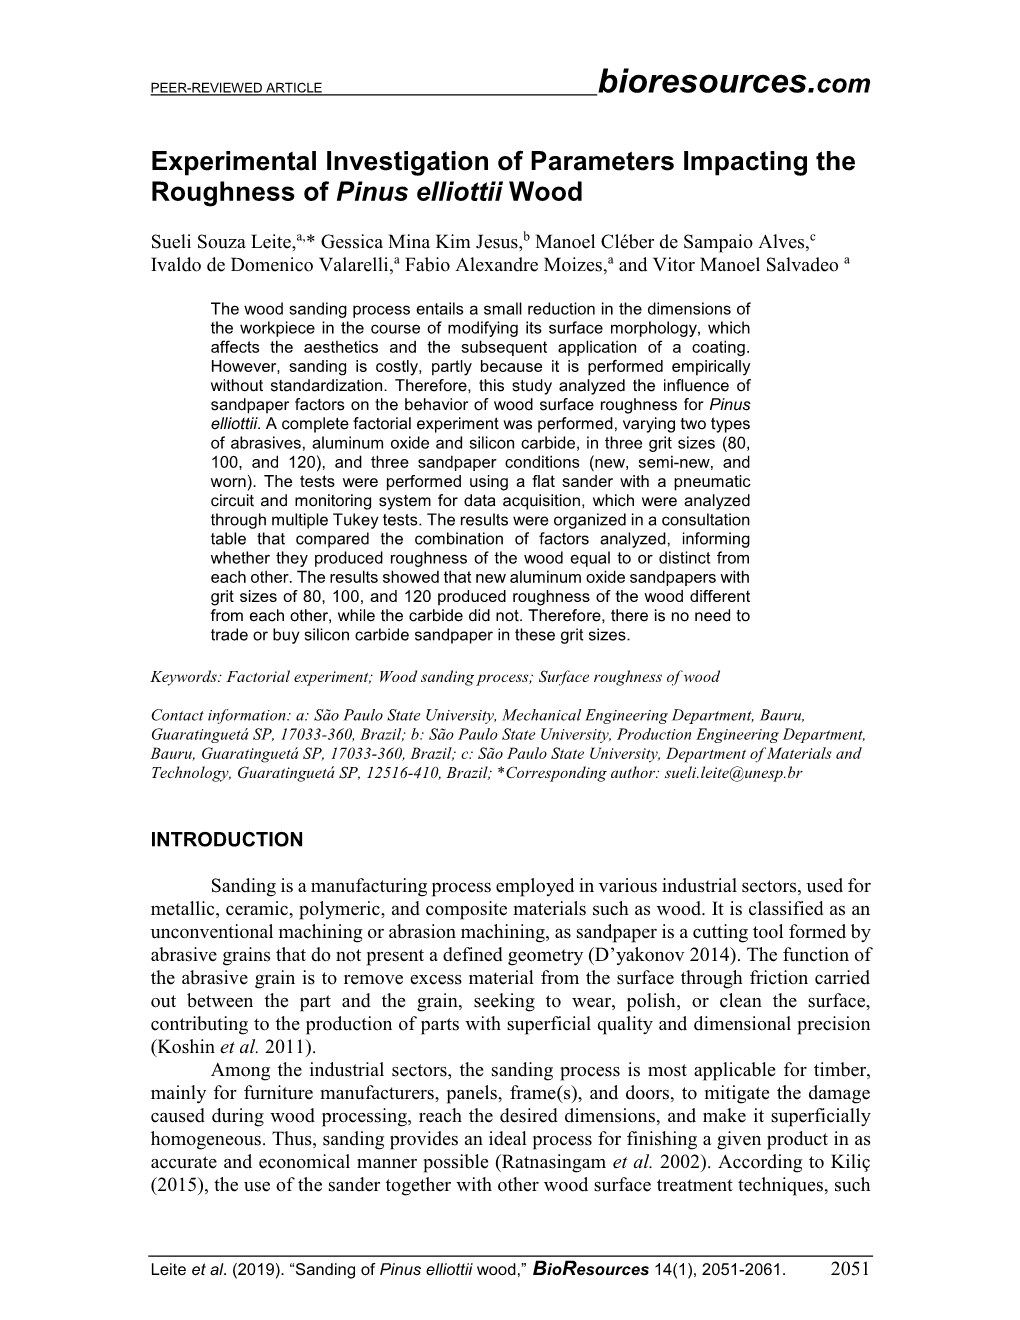 Experimental Investigation of Parameters Impacting the Roughness of Pinus Elliottii Wood